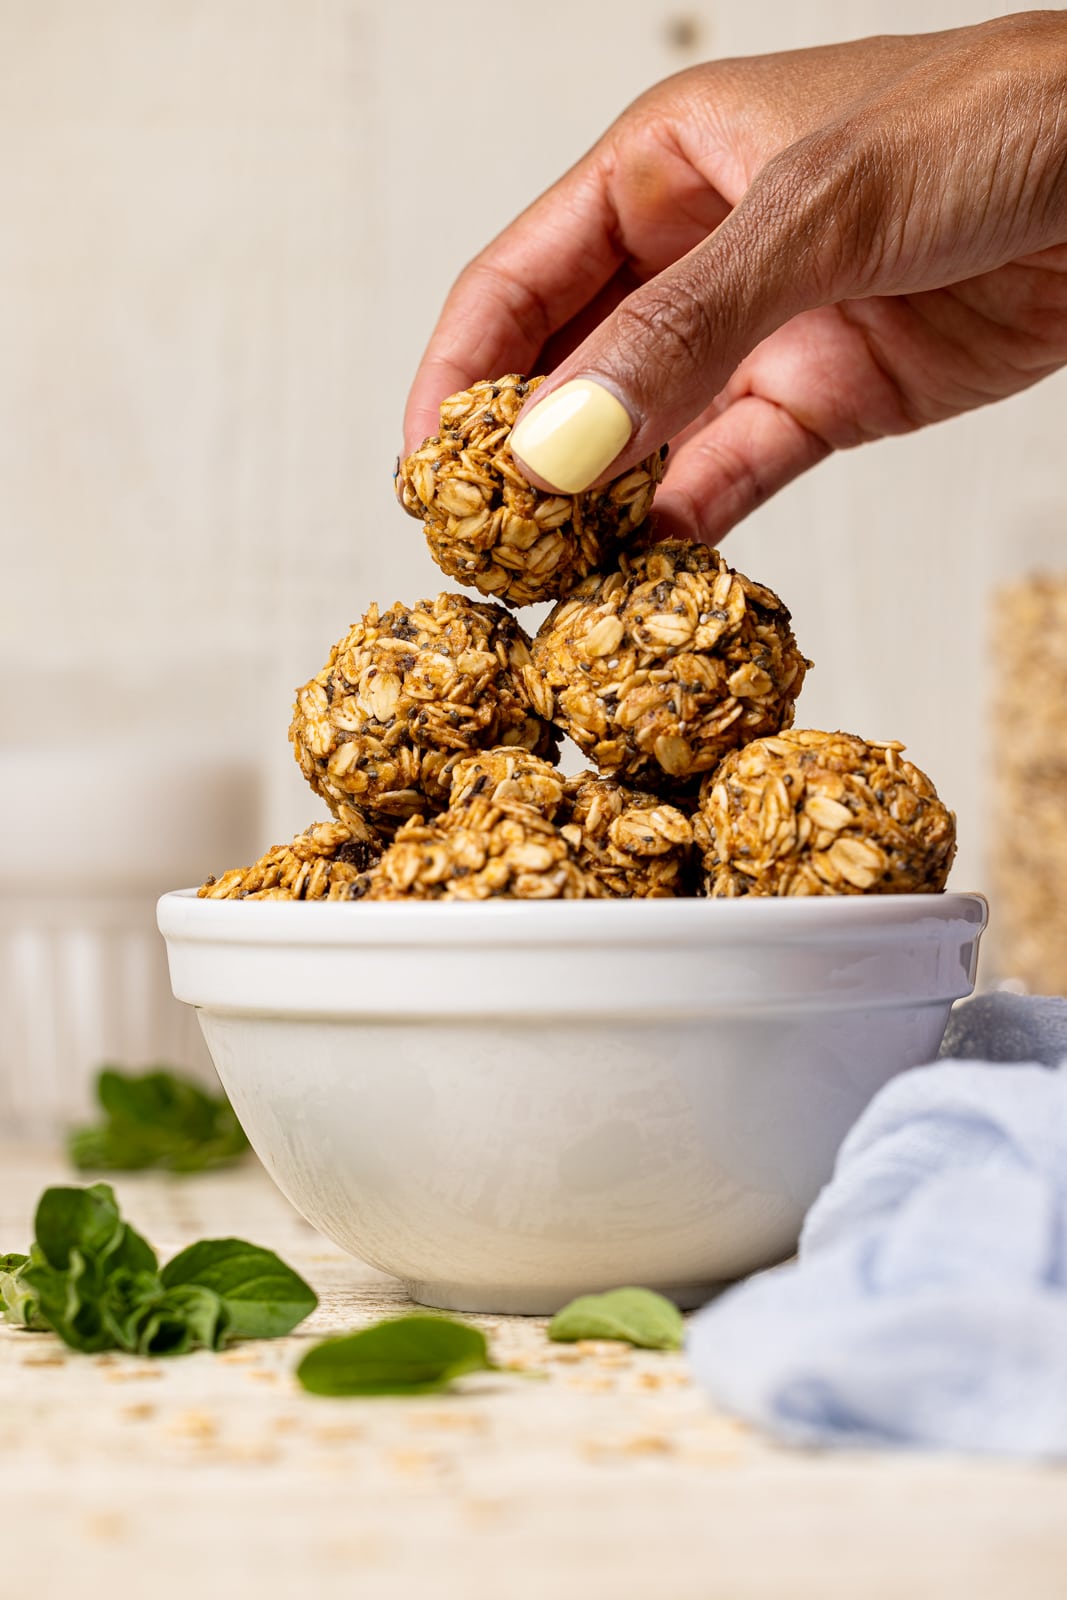 https://www.orchidsandsweettea.com/wp-content/uploads/2017/06/No-Bake-Chocolate-Chip-And-Coconut-Protein-Balls-6-of-7.jpg